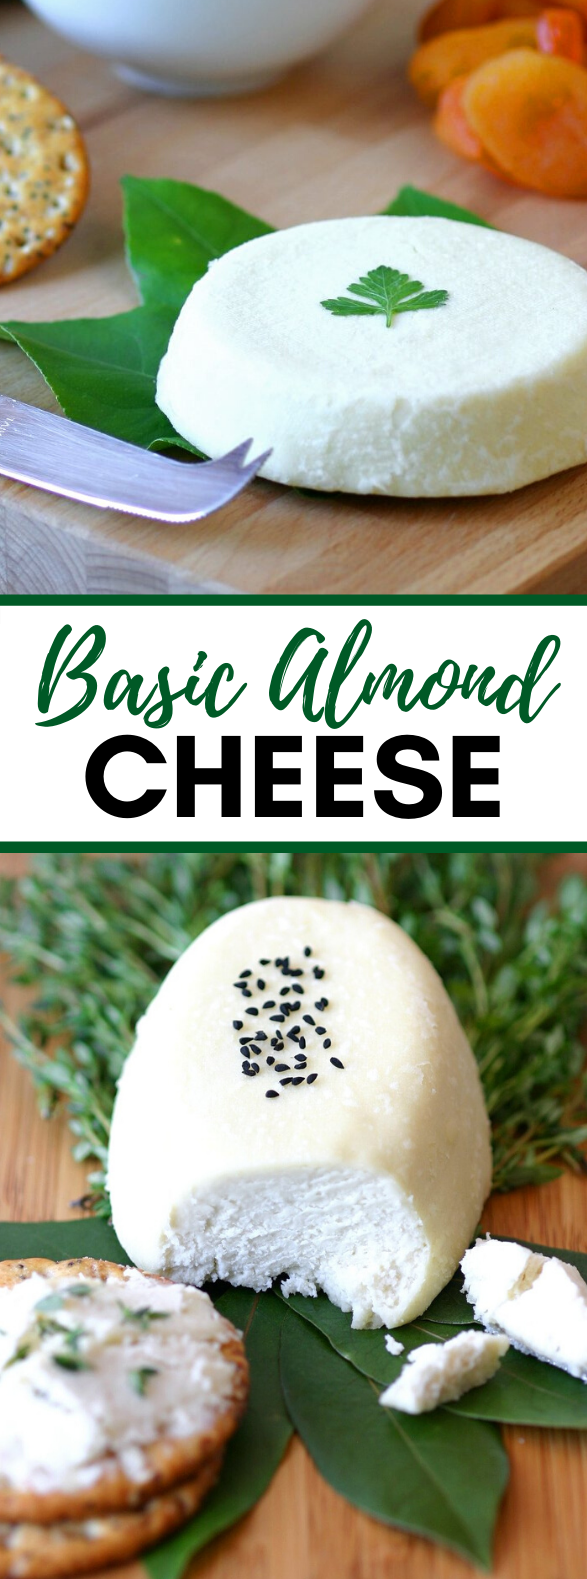 BASIC ALMOND CHEESE #dinner #meals